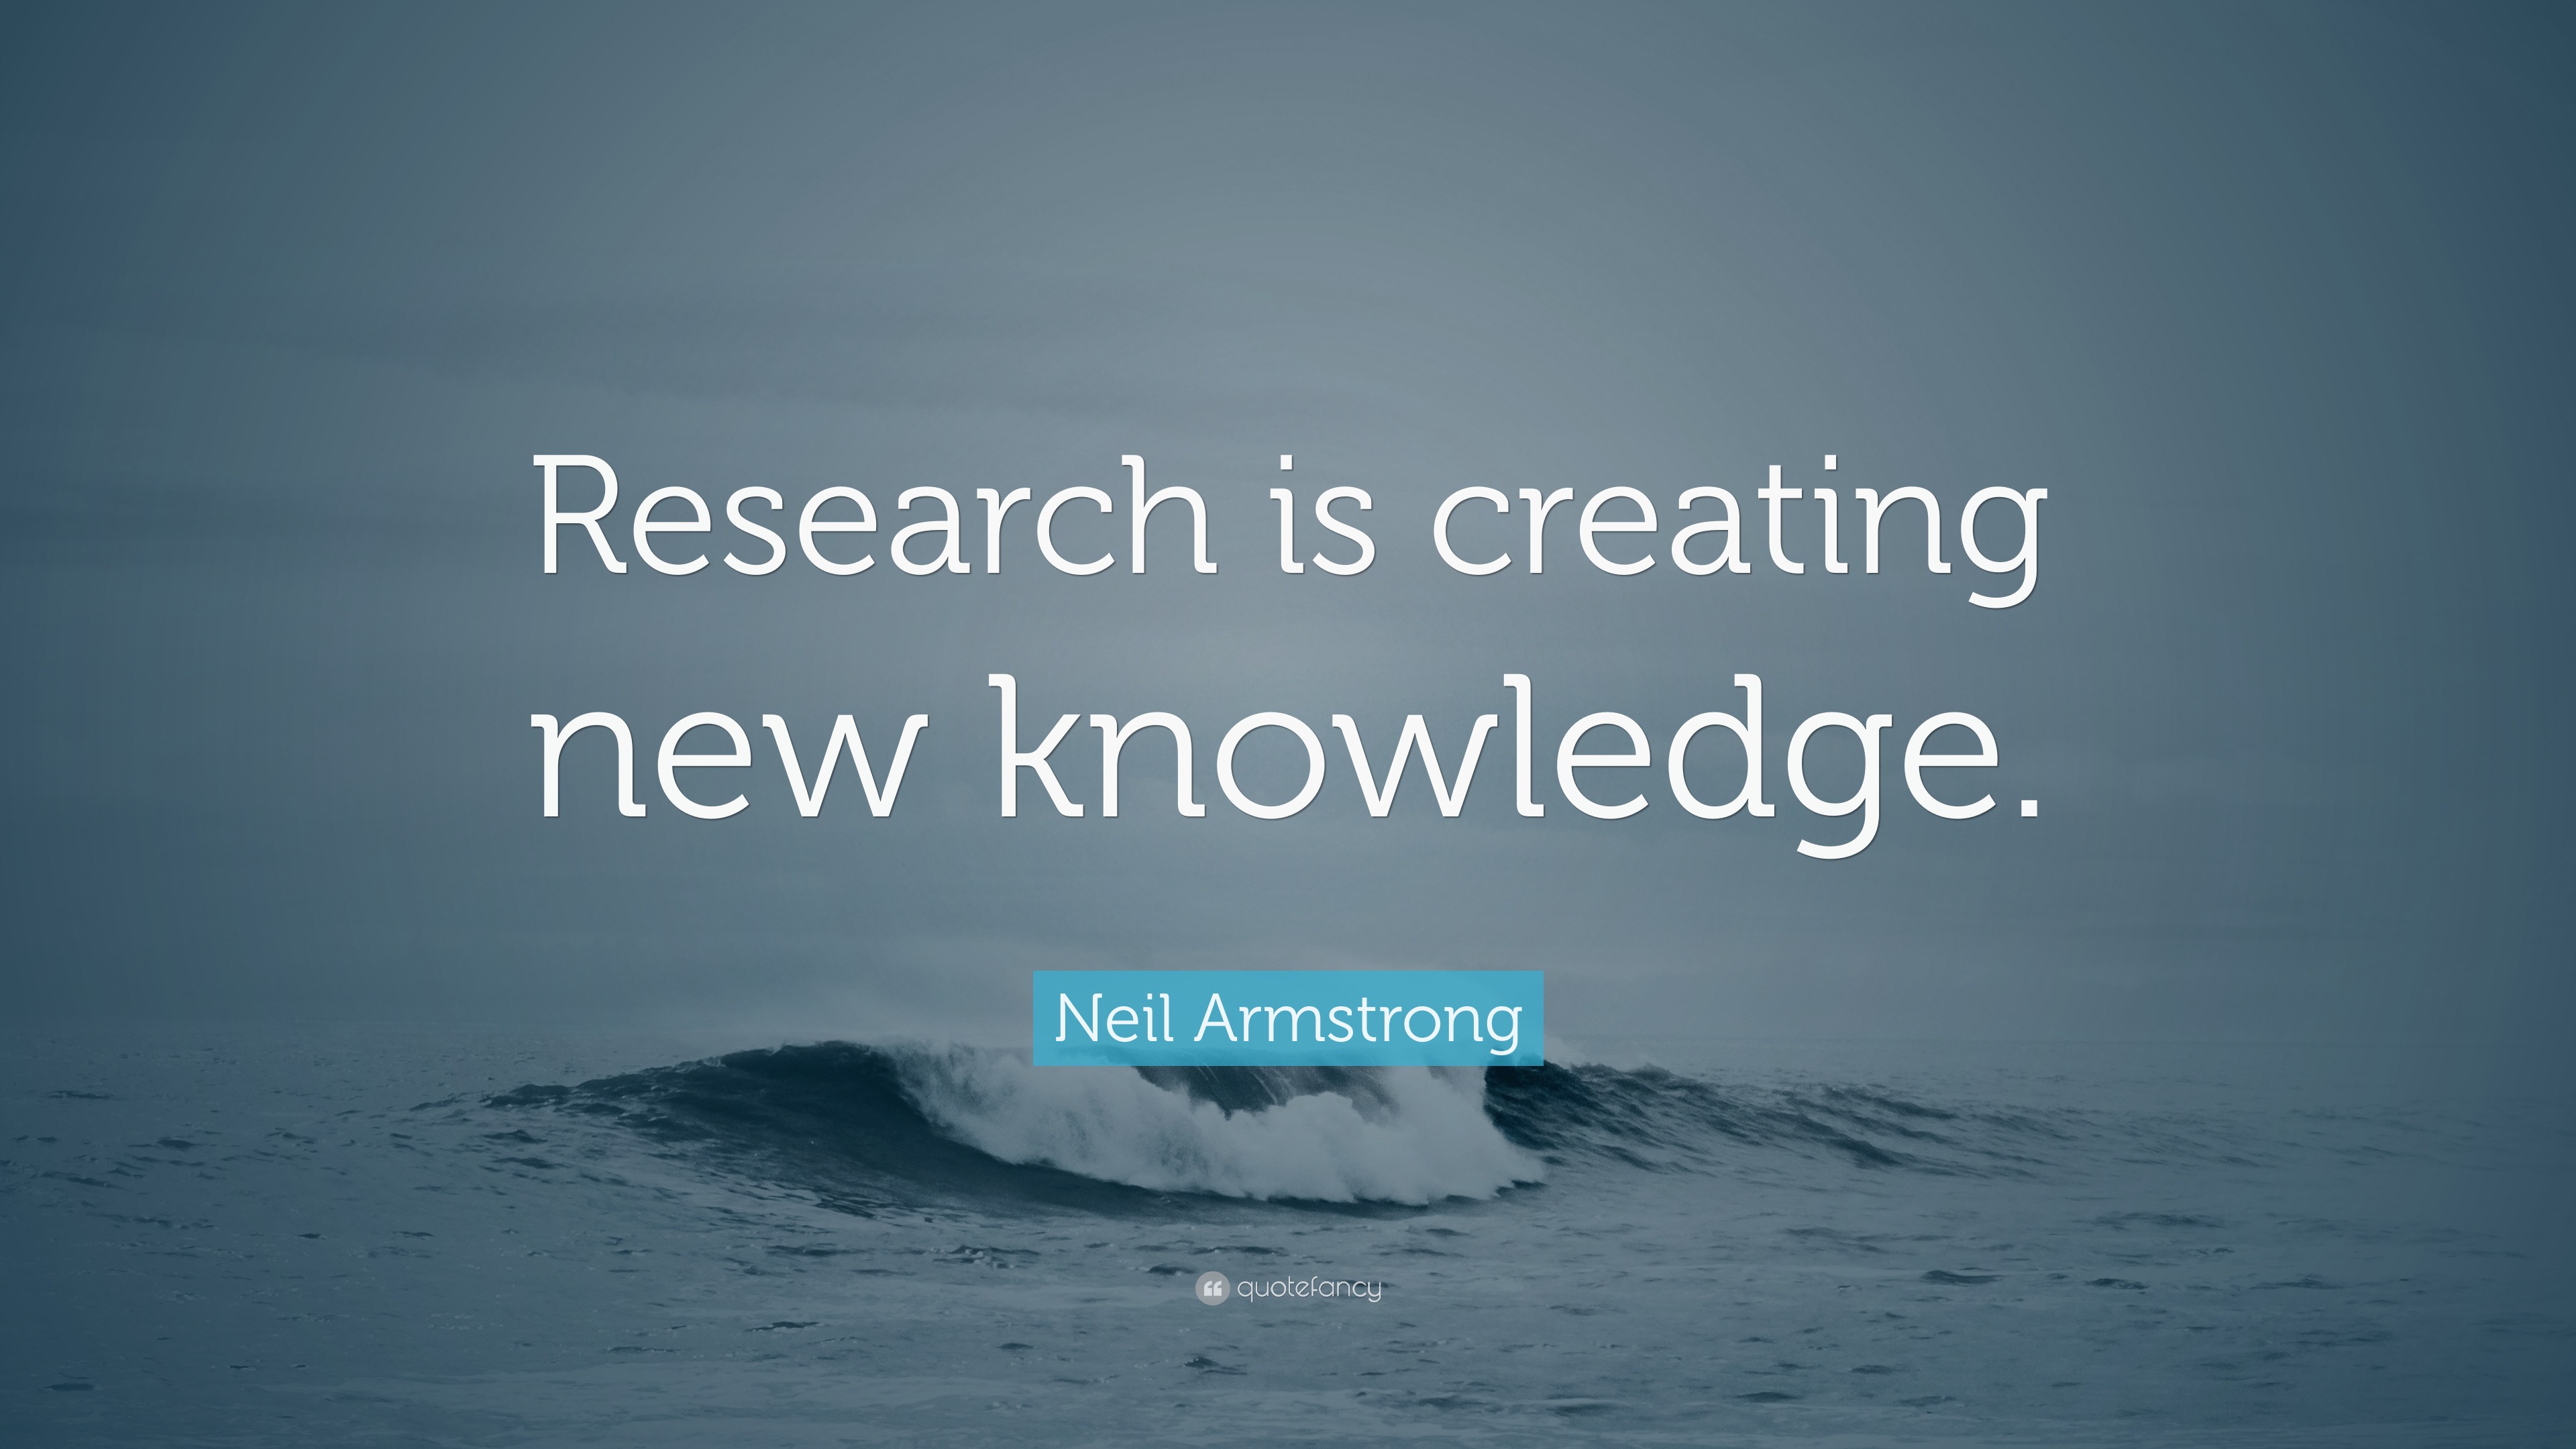 research is creating new knowledge meaning